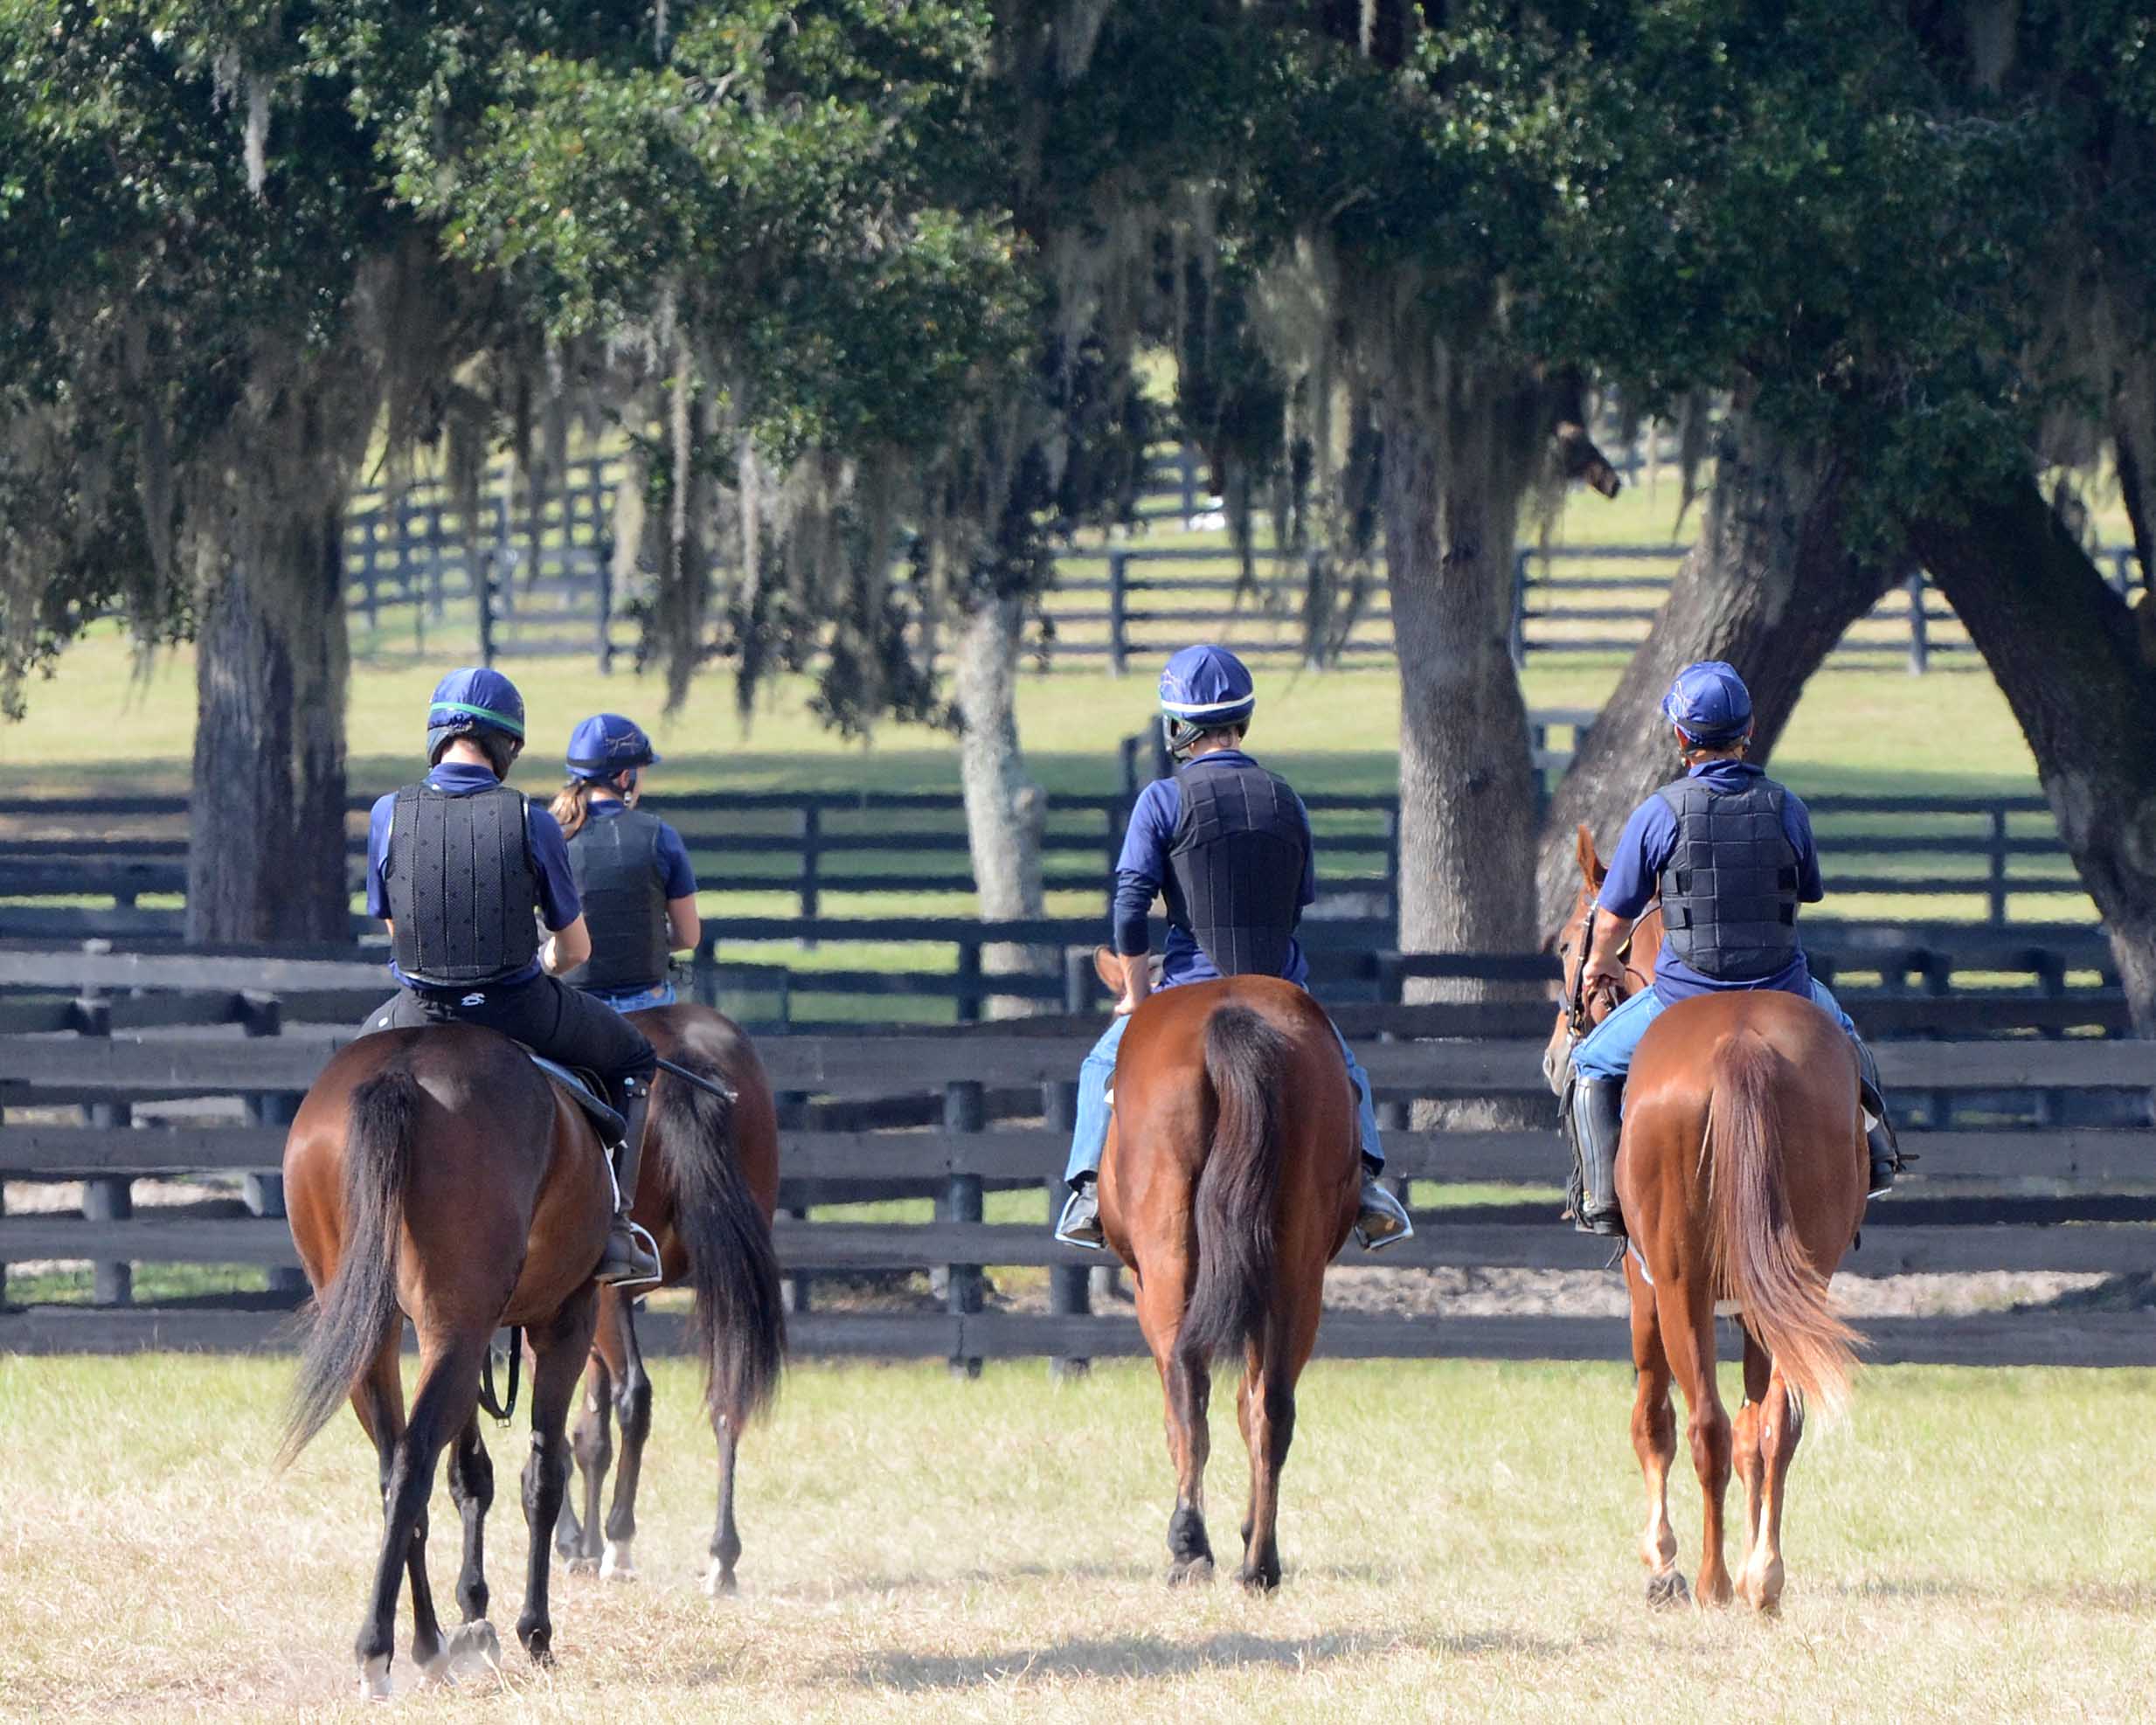 Two-Year-Olds training, Stonestreet Training Center 2015, 2 year old